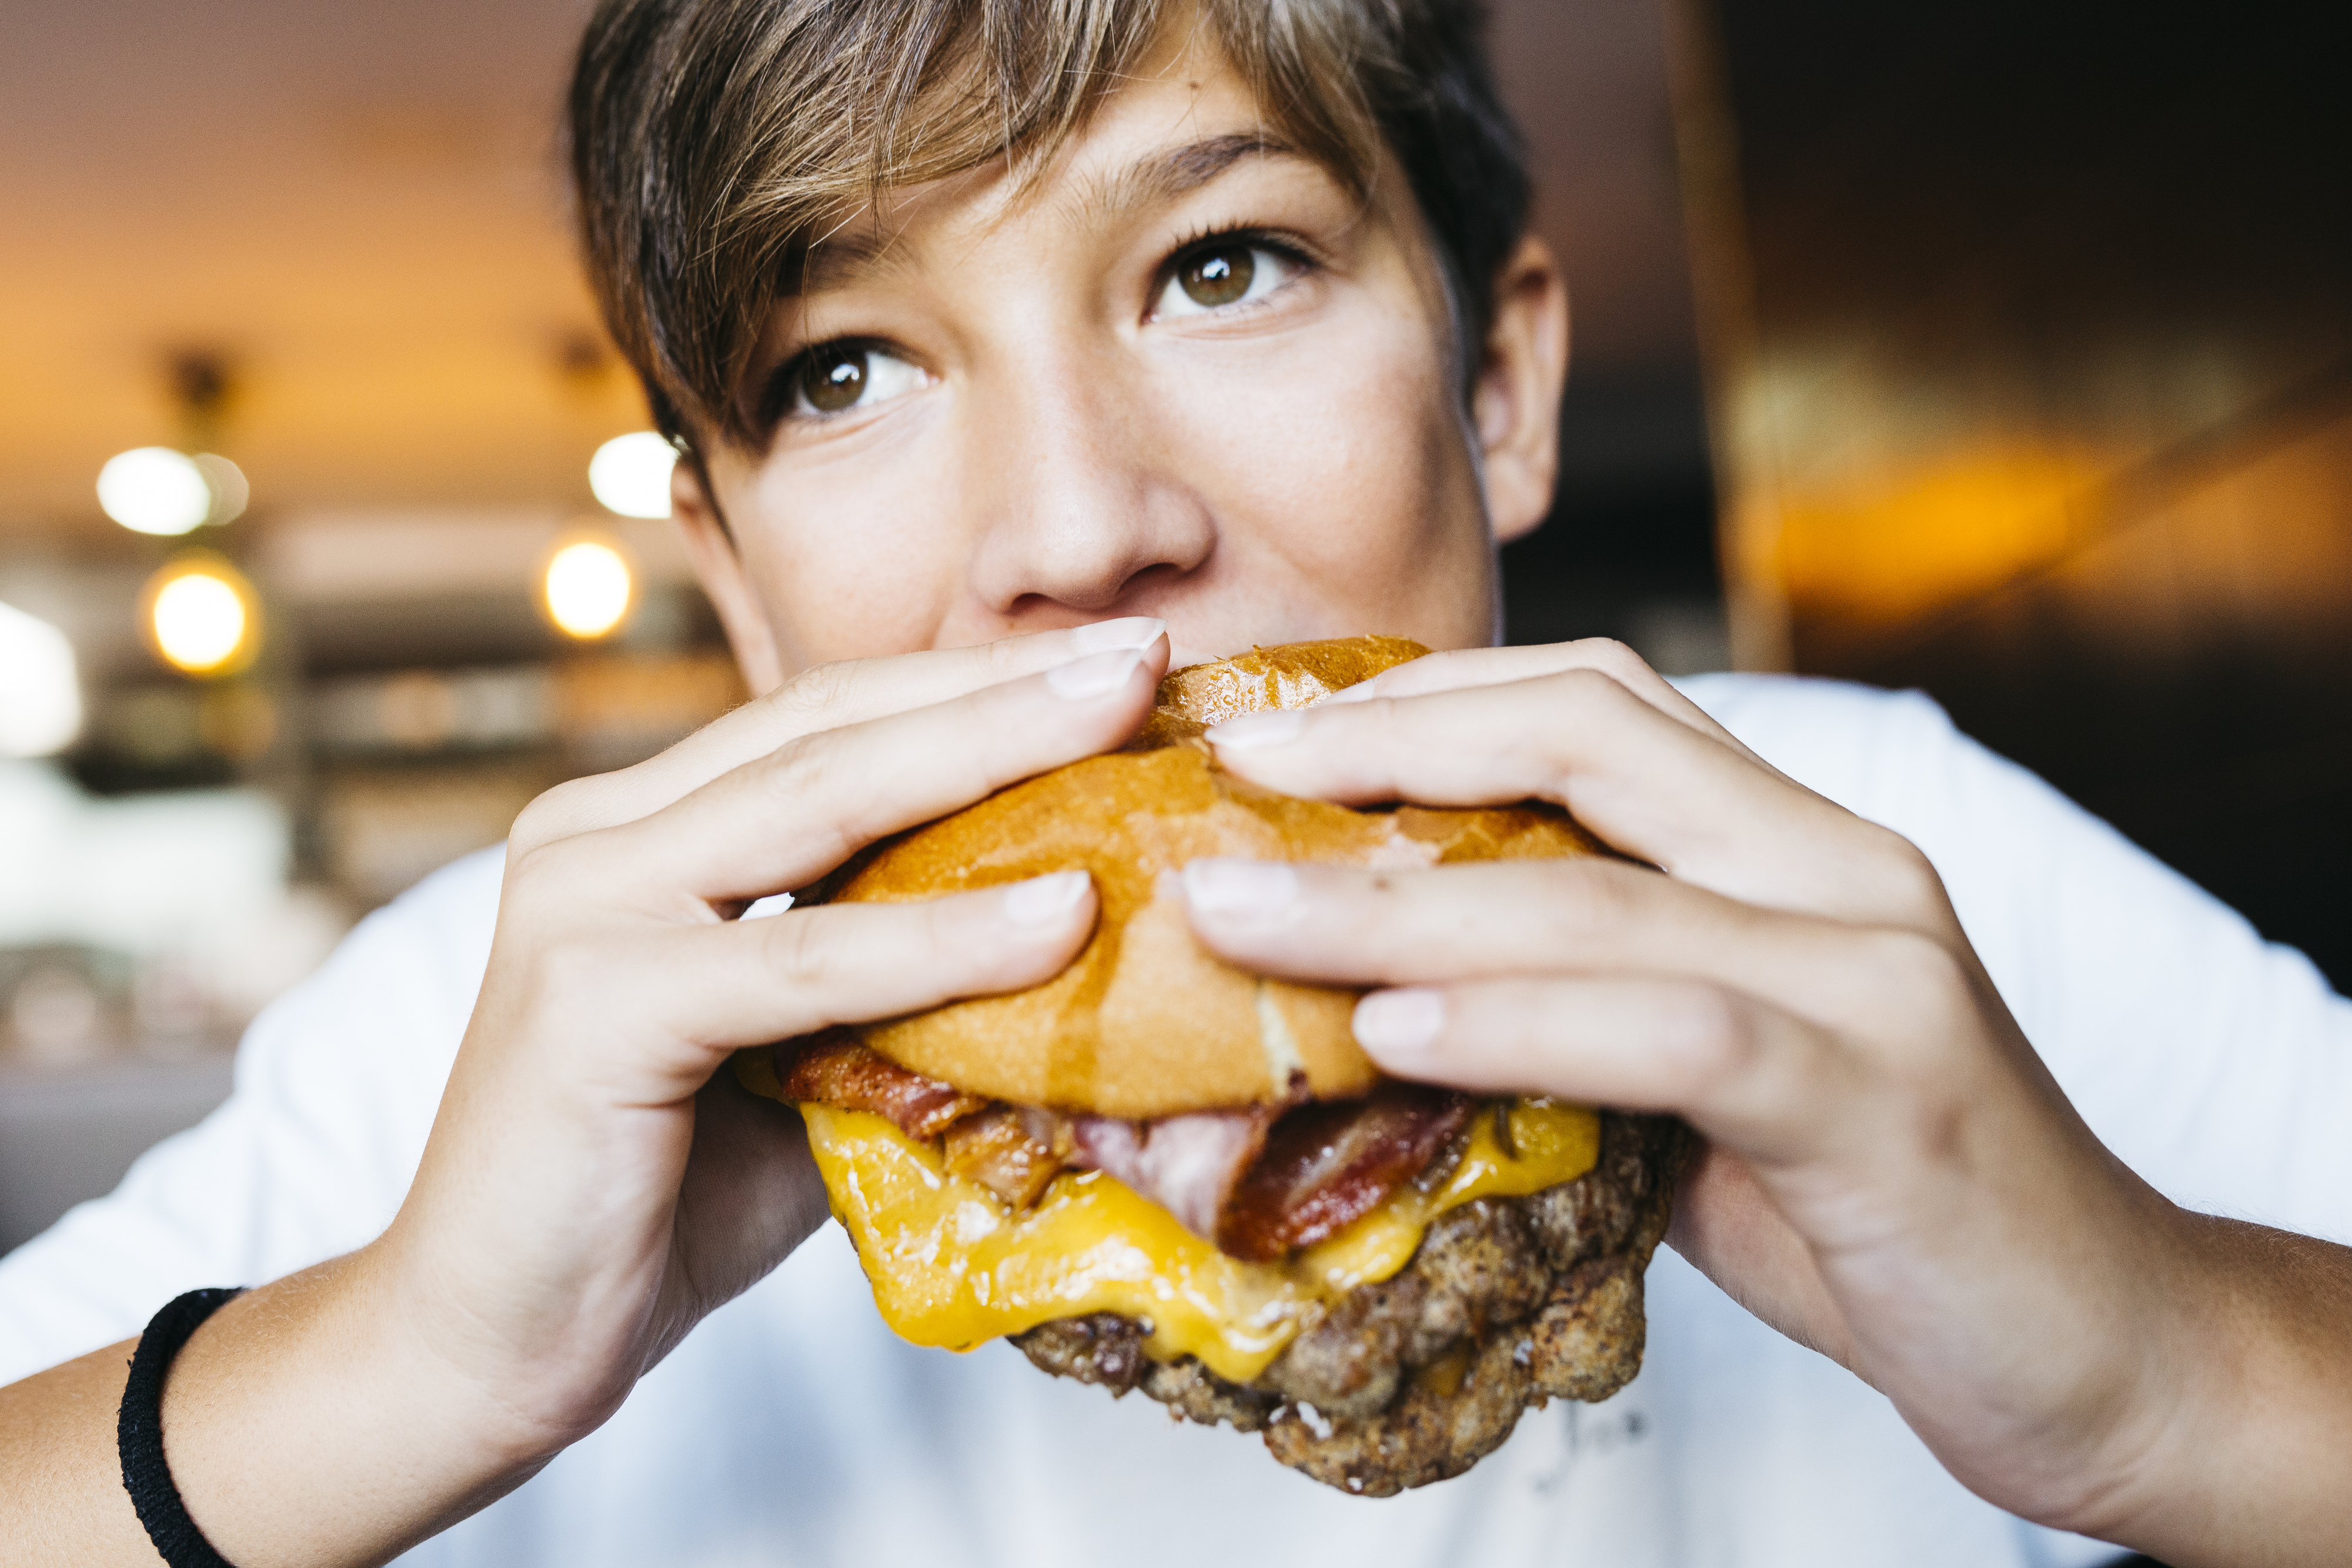 Person eating a large cheeseburger with both hands